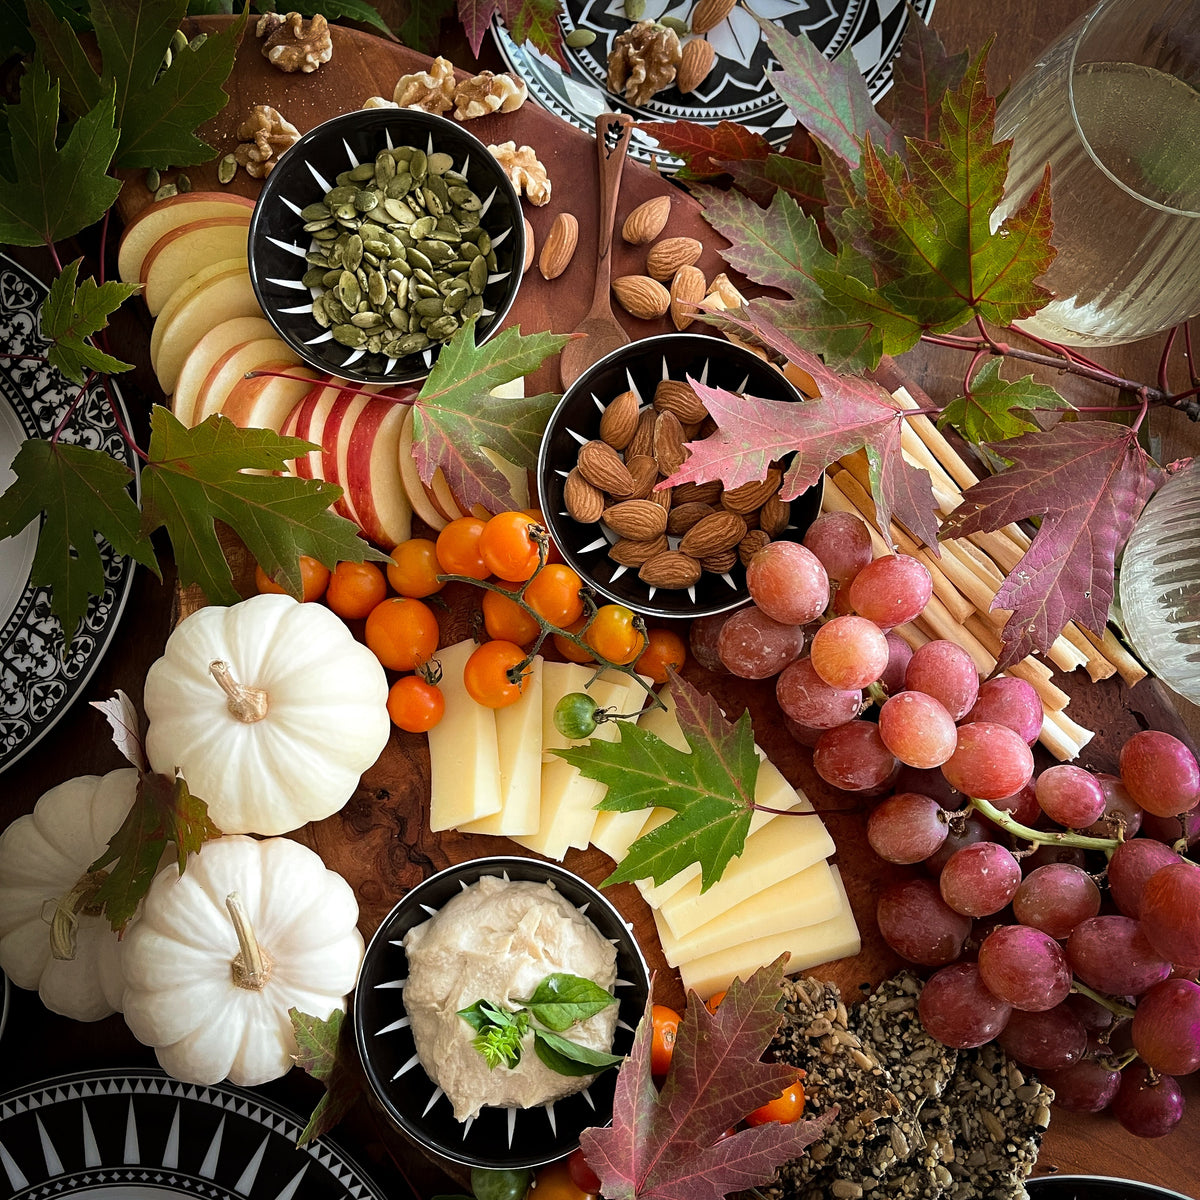 A wooden board with grapes, cheese, nuts, seeds, and apple slices is beautifully arranged among colorful autumn leaves. Tiny white pumpkins and Caskata Marrakech Dipping Dishes, Set of 4 complete the scene.